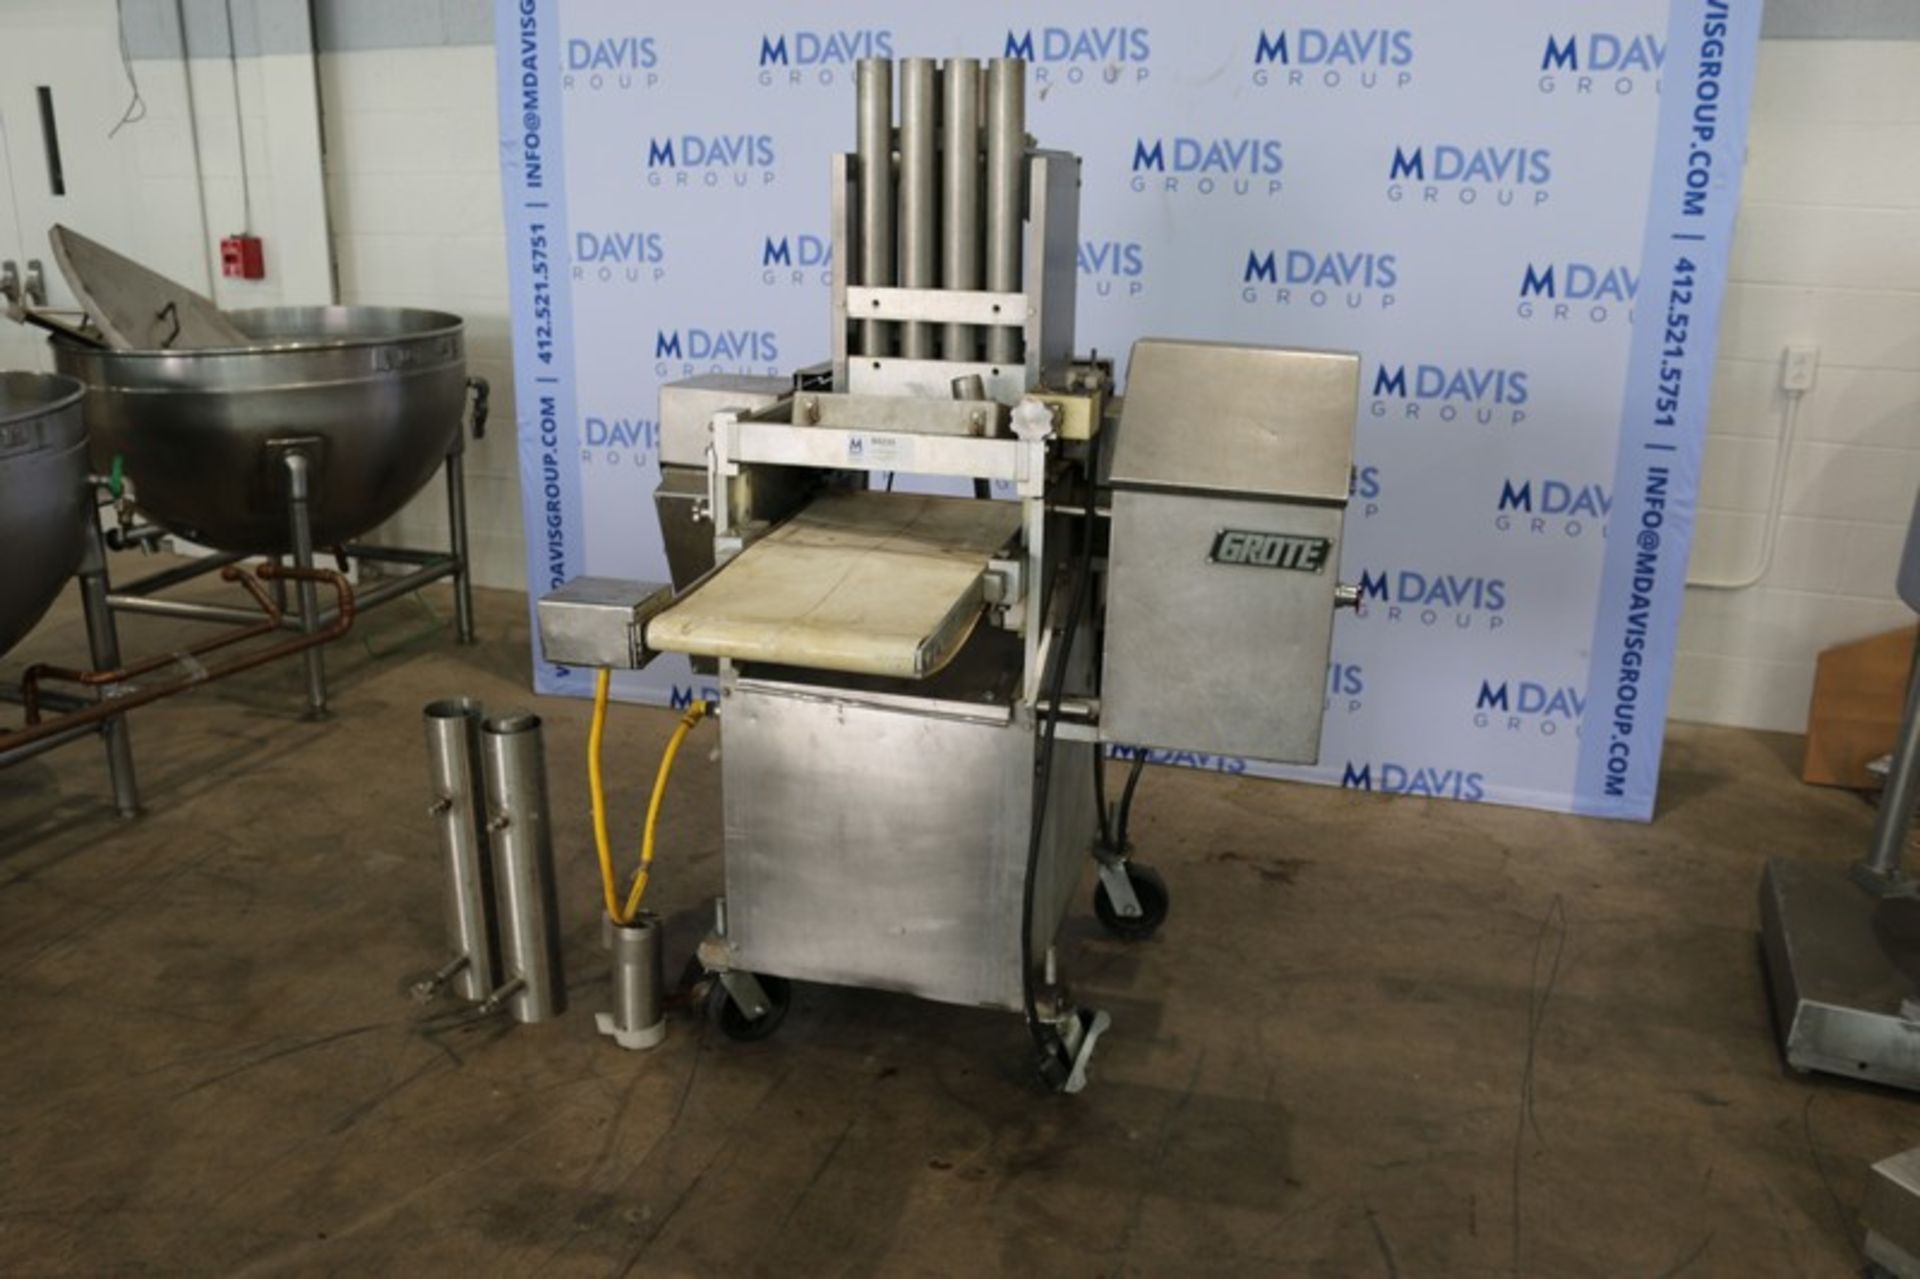 Grote S/S Multi-Slicer, M/N 713, S/N 1047816, with Aprox. 14" W Outfeed Belt, with S/S Infeed